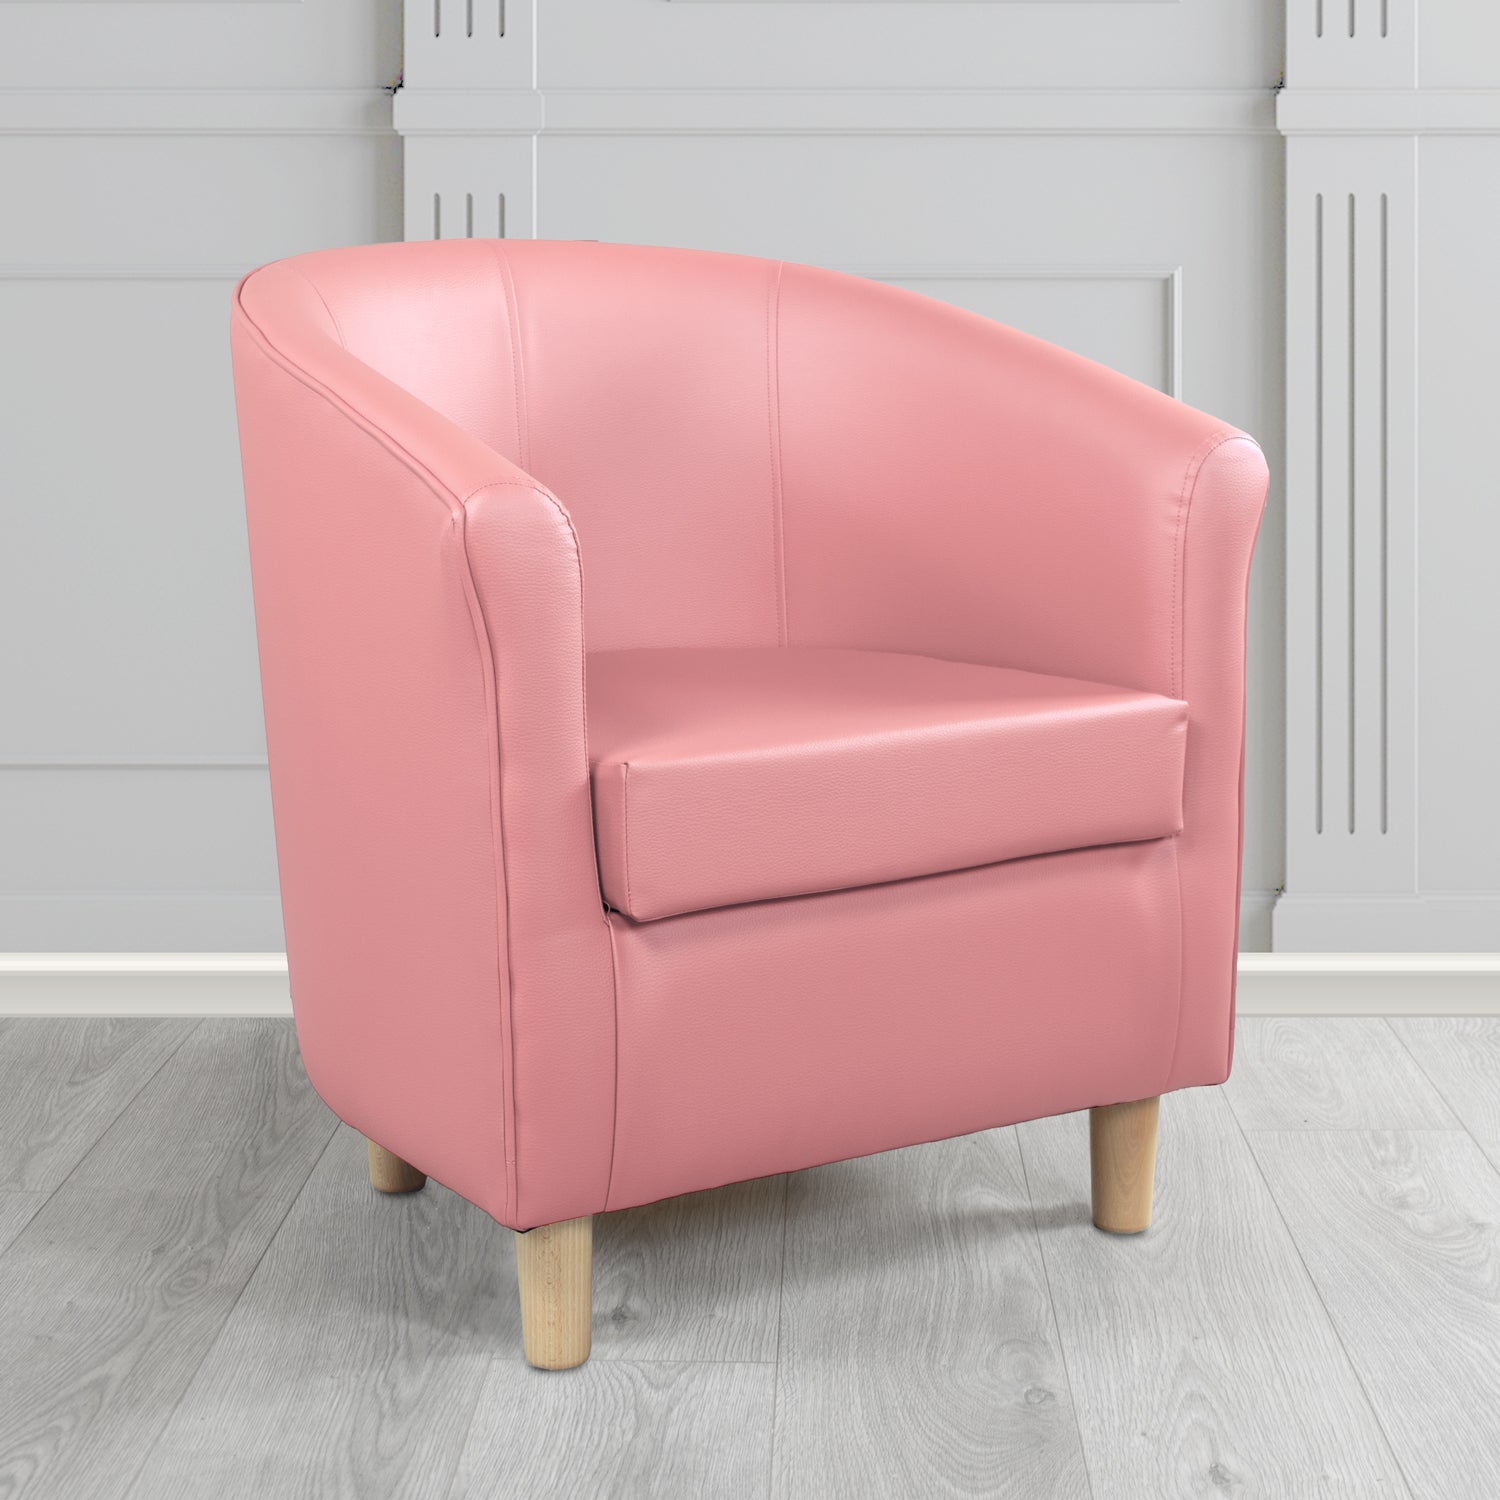 Tuscany Just Colour Cherry Blossom Antimicrobial Crib 5 Contract Faux Leather Tub Chair